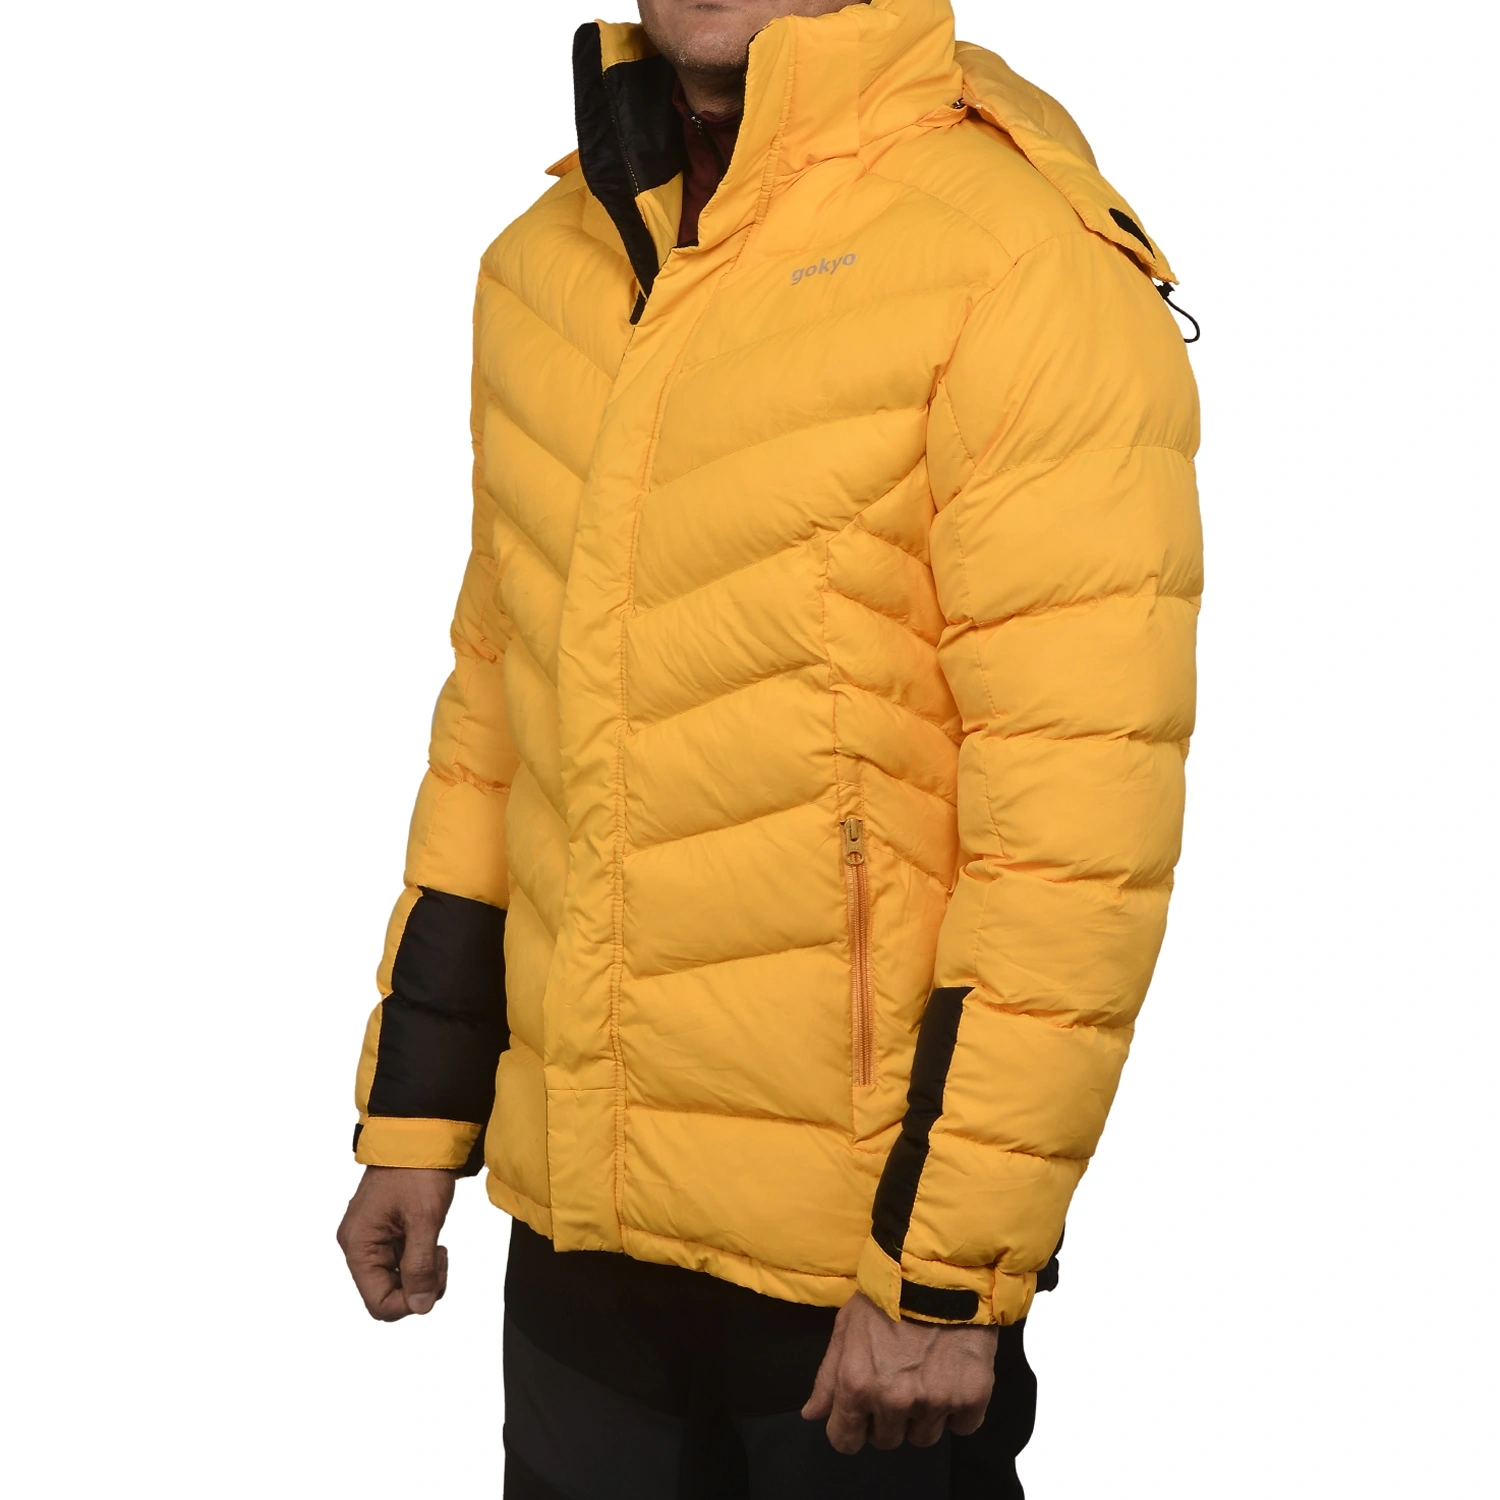 K2 Survivor Down Jacket for Men: Stylized Functionality for Extreme Cold Weather Expeditions (Up to -20°C)-M-Yellow-2